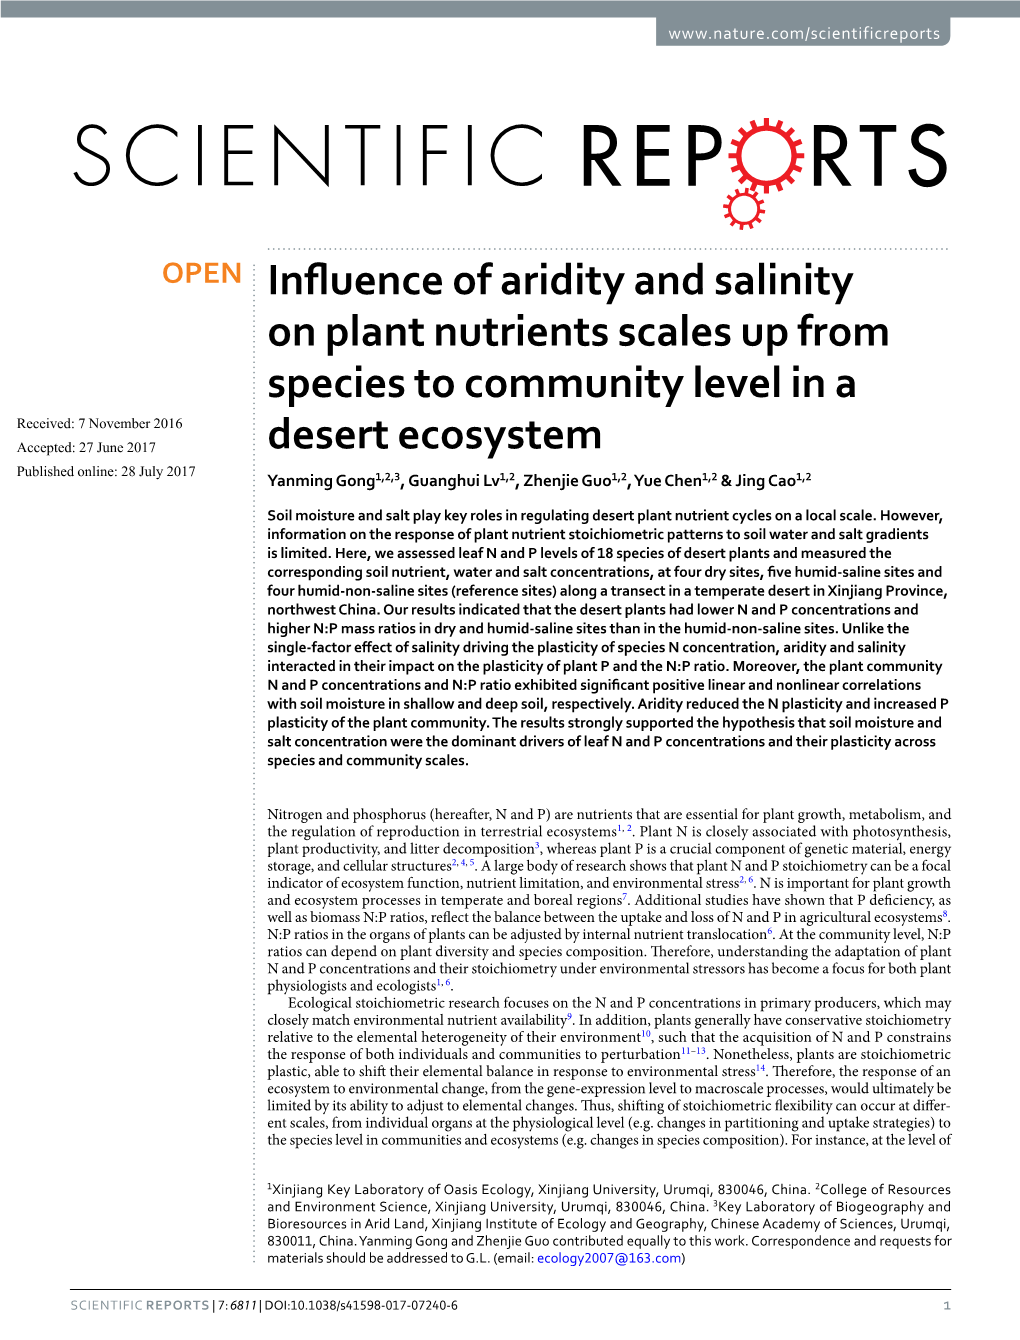 Influence of Aridity and Salinity on Plant Nutrients Scales Up